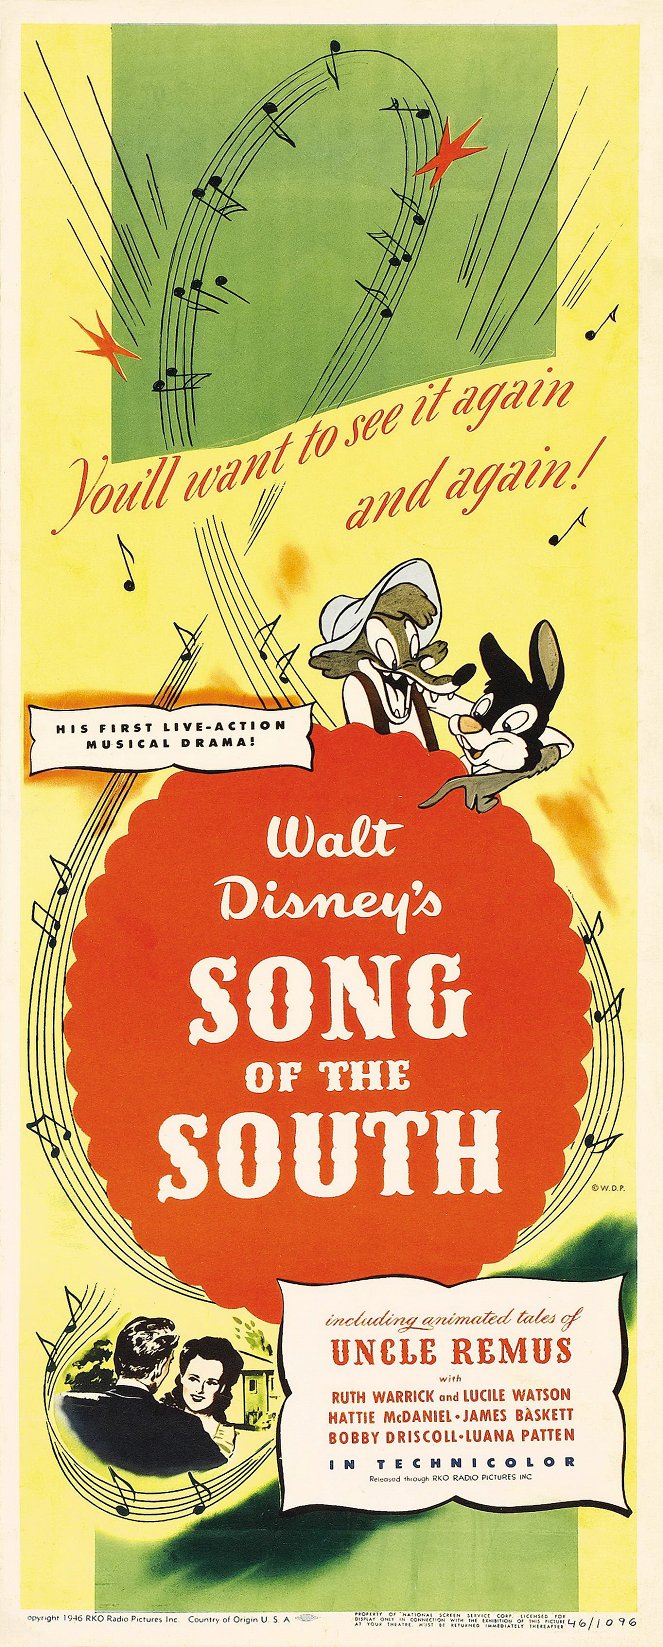 Song of the South - Posters